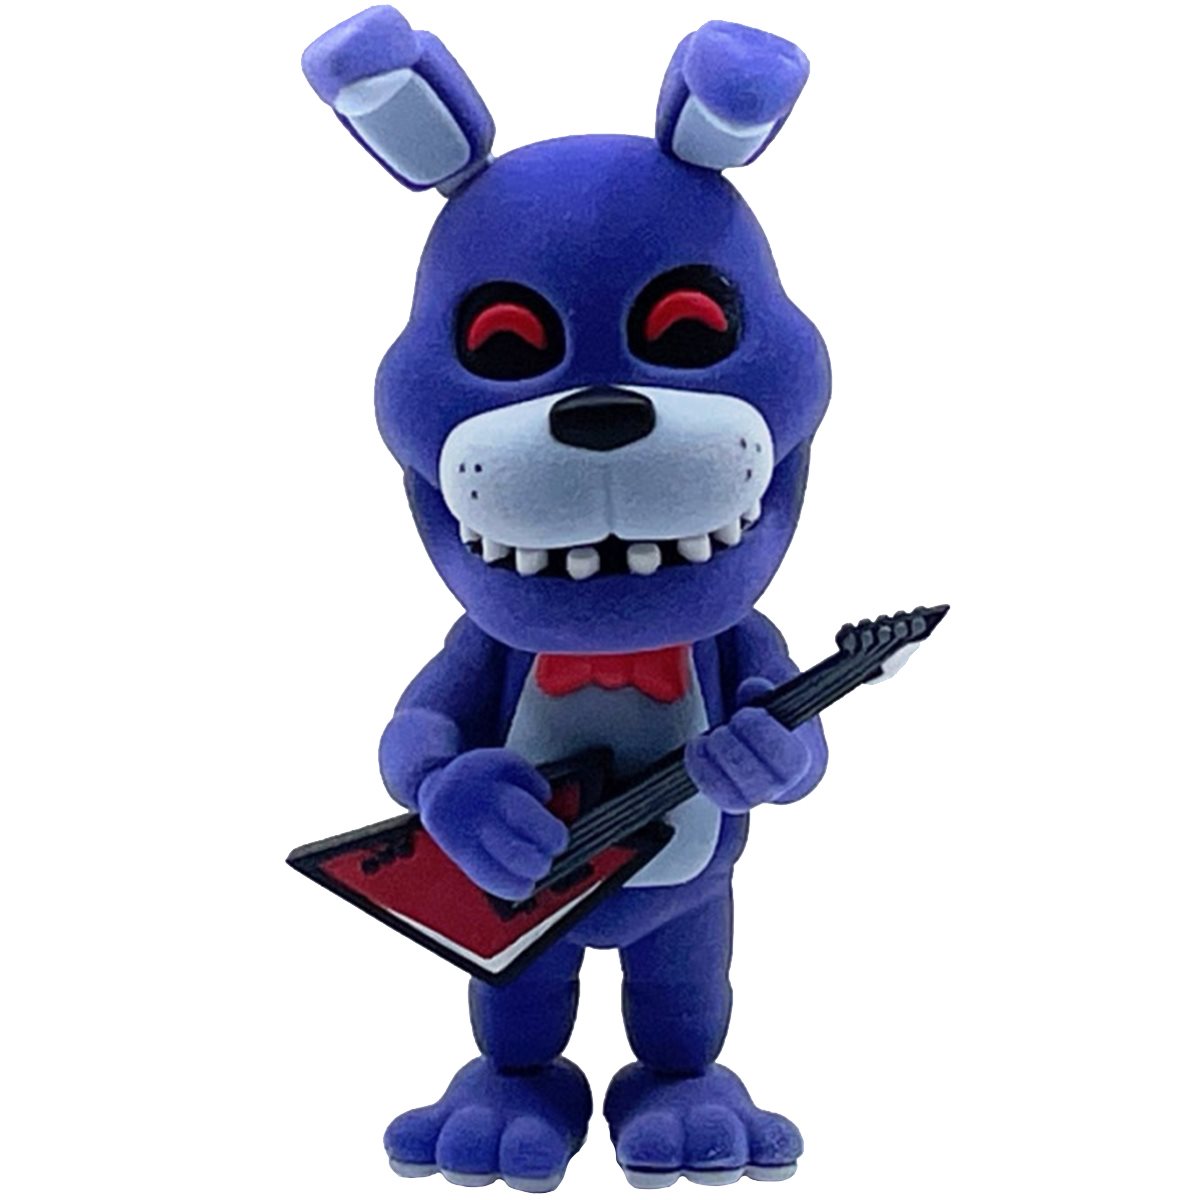 Funko Five Nights at Freddy's 4 Figure Pack (Set 2), 2-Inch 